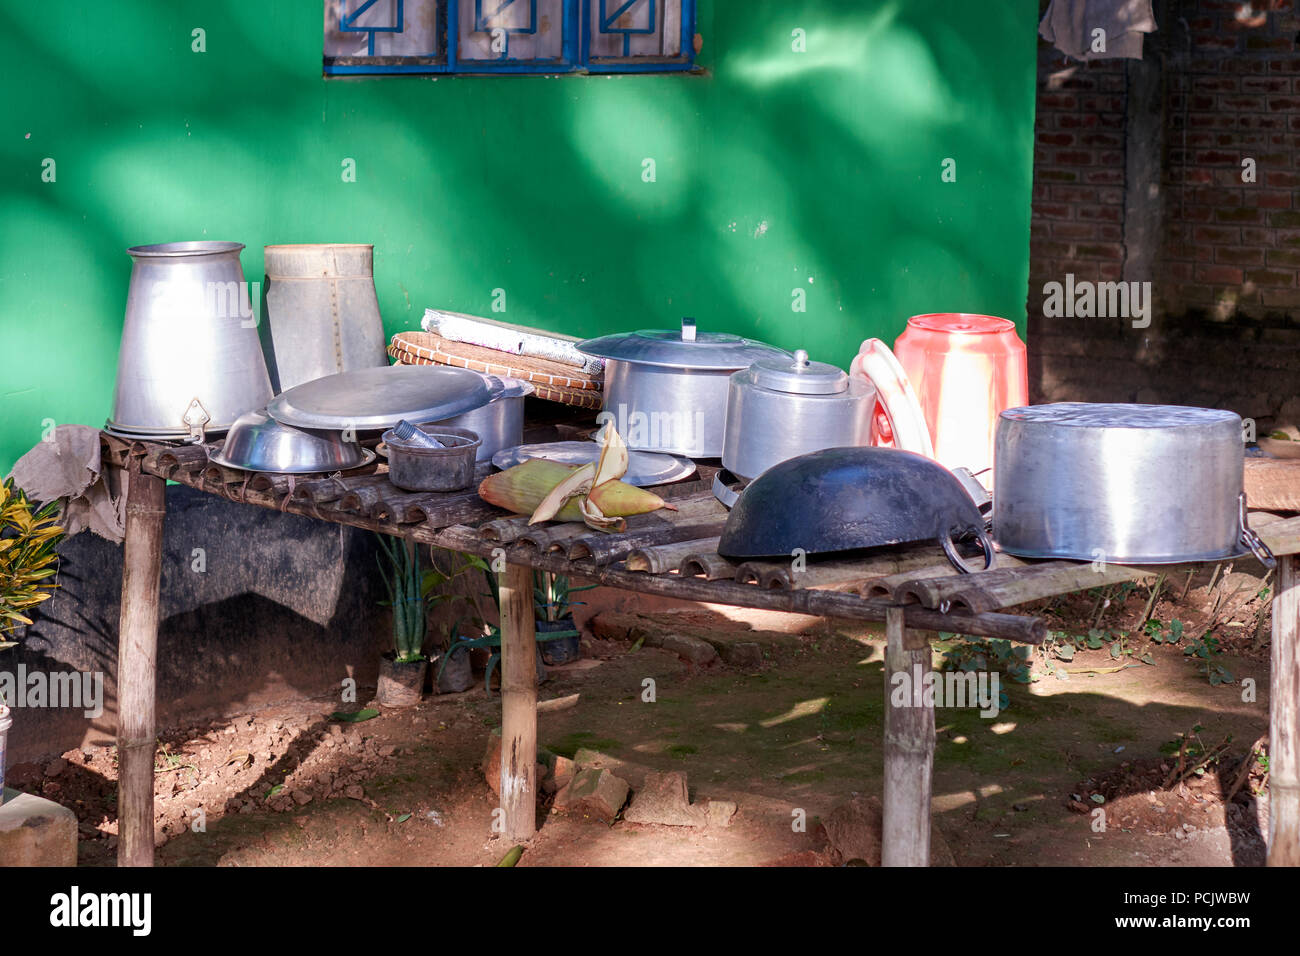 Pots & pans drying outside kitchen in India Stock Photo